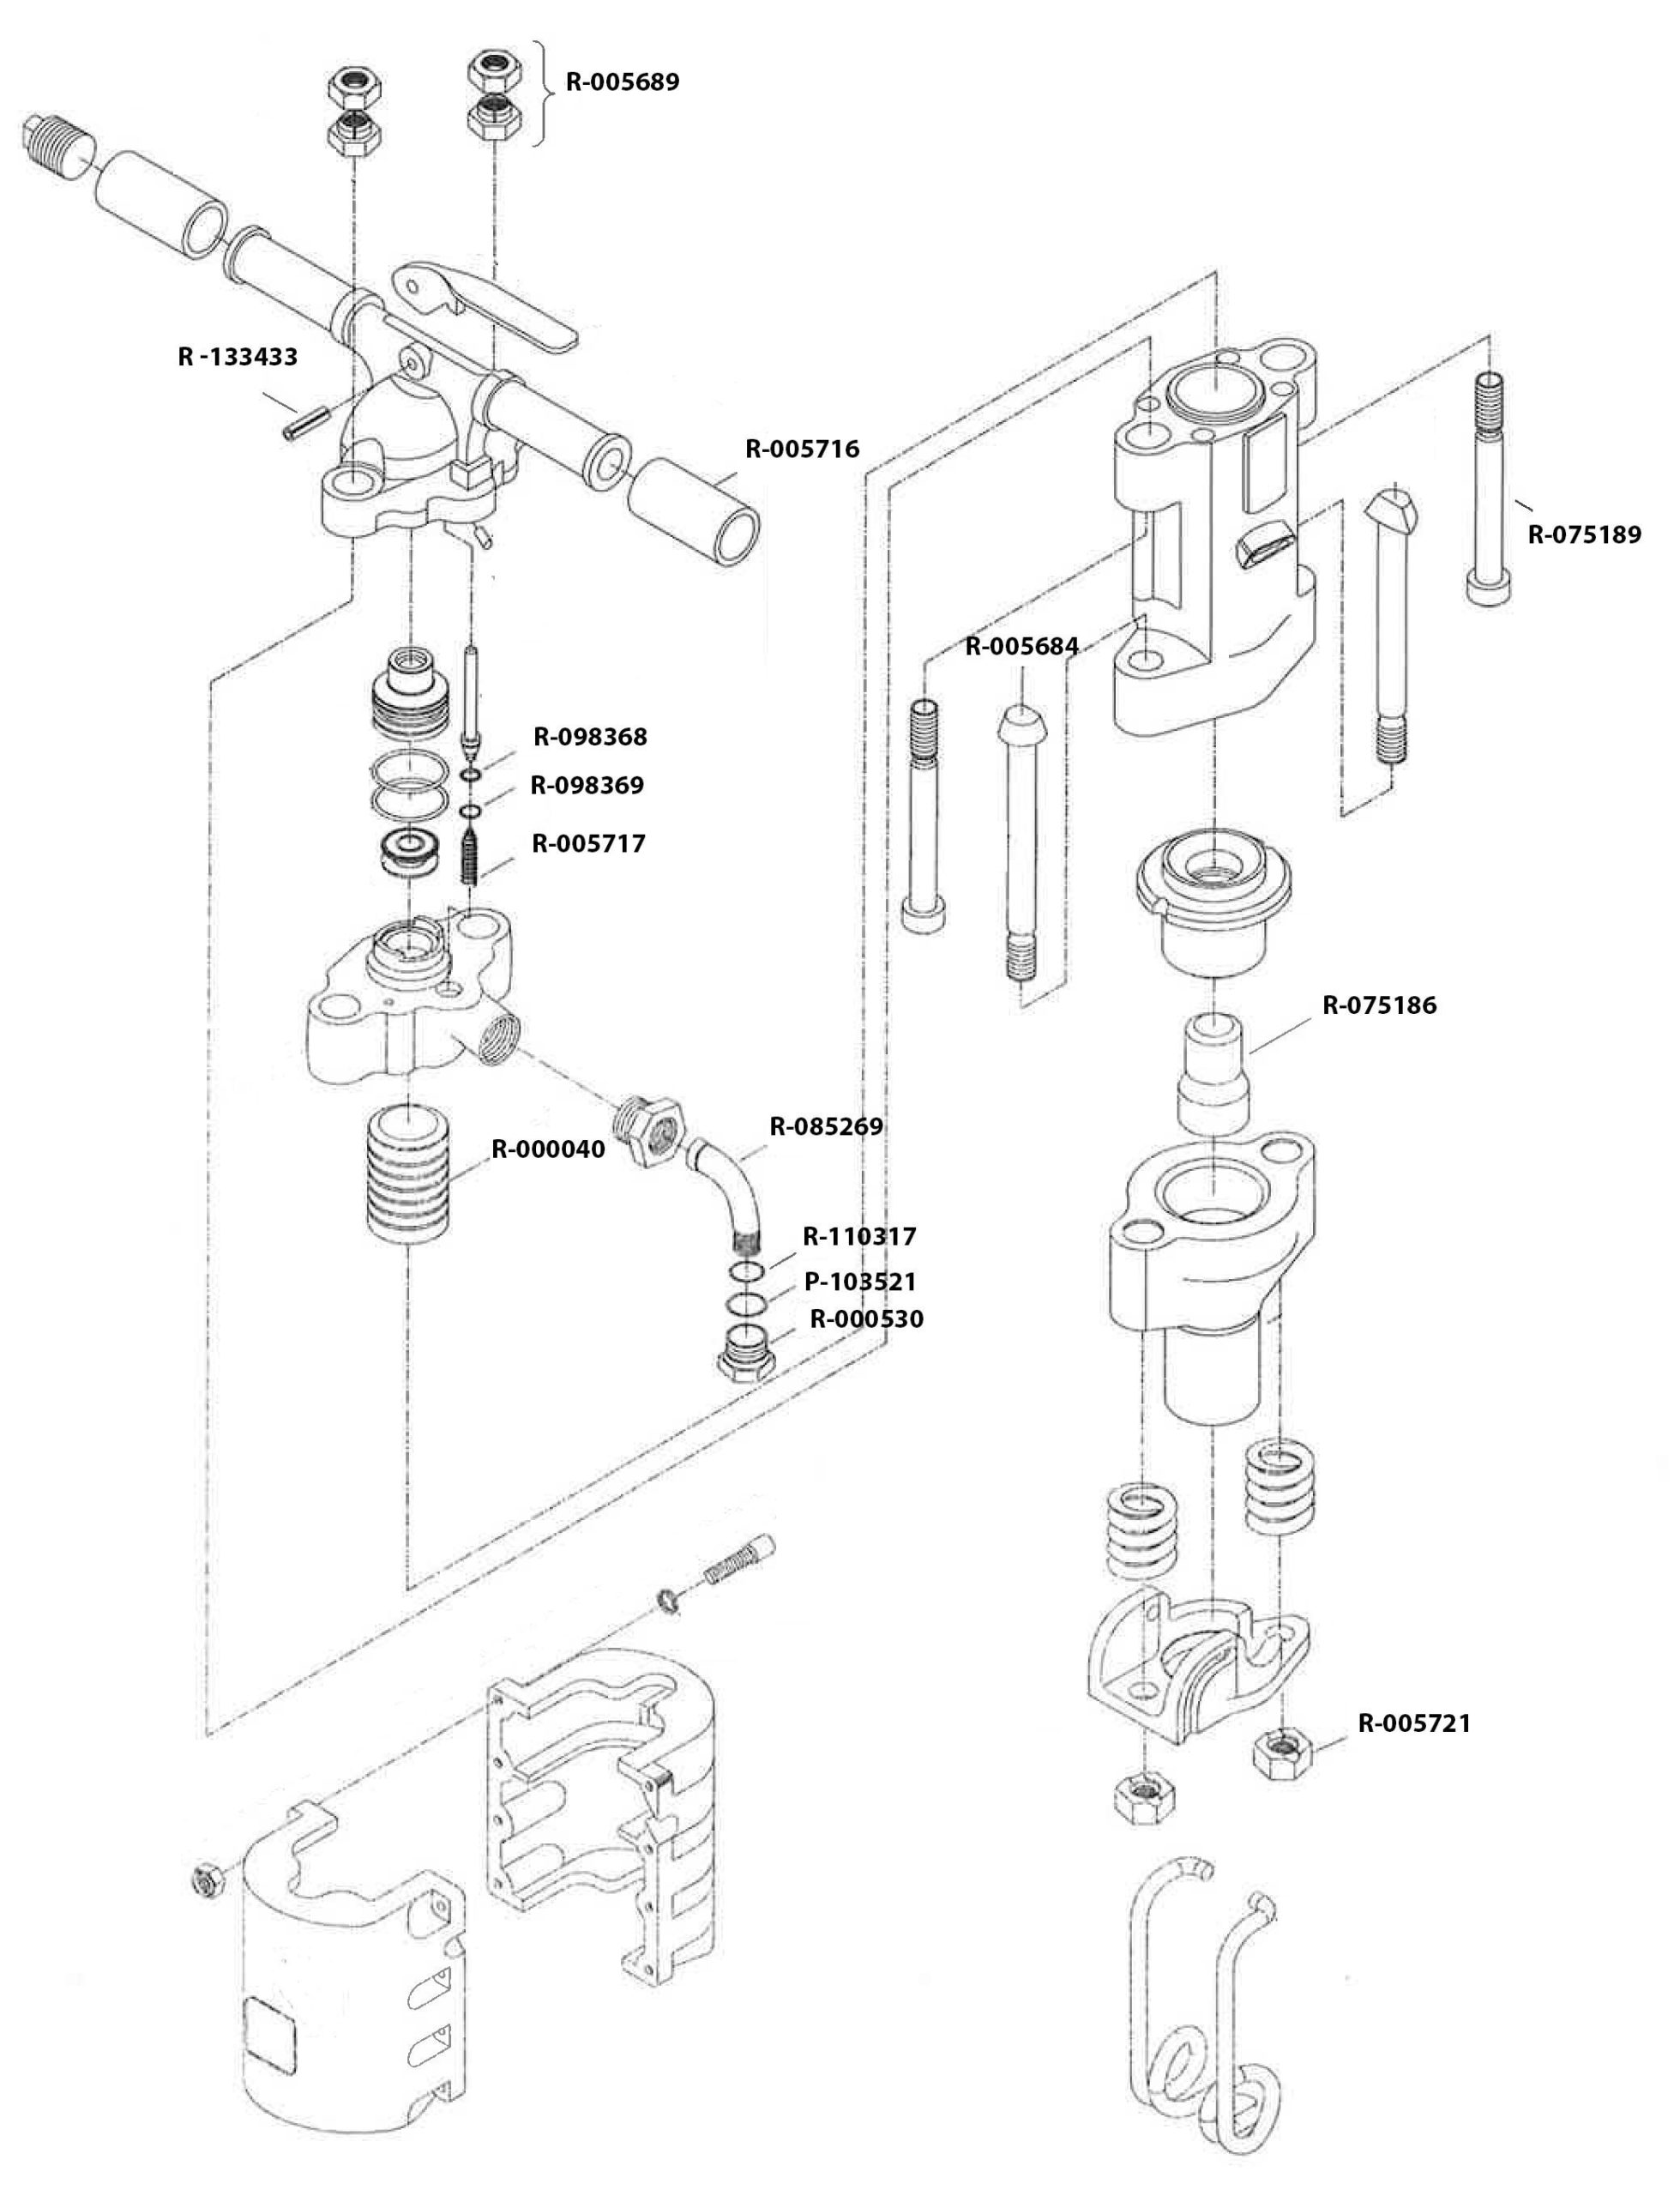 CP 0117 Schematic & Replacement Parts for Chicago Pneumatic - Model 0117 - Paving Breaker